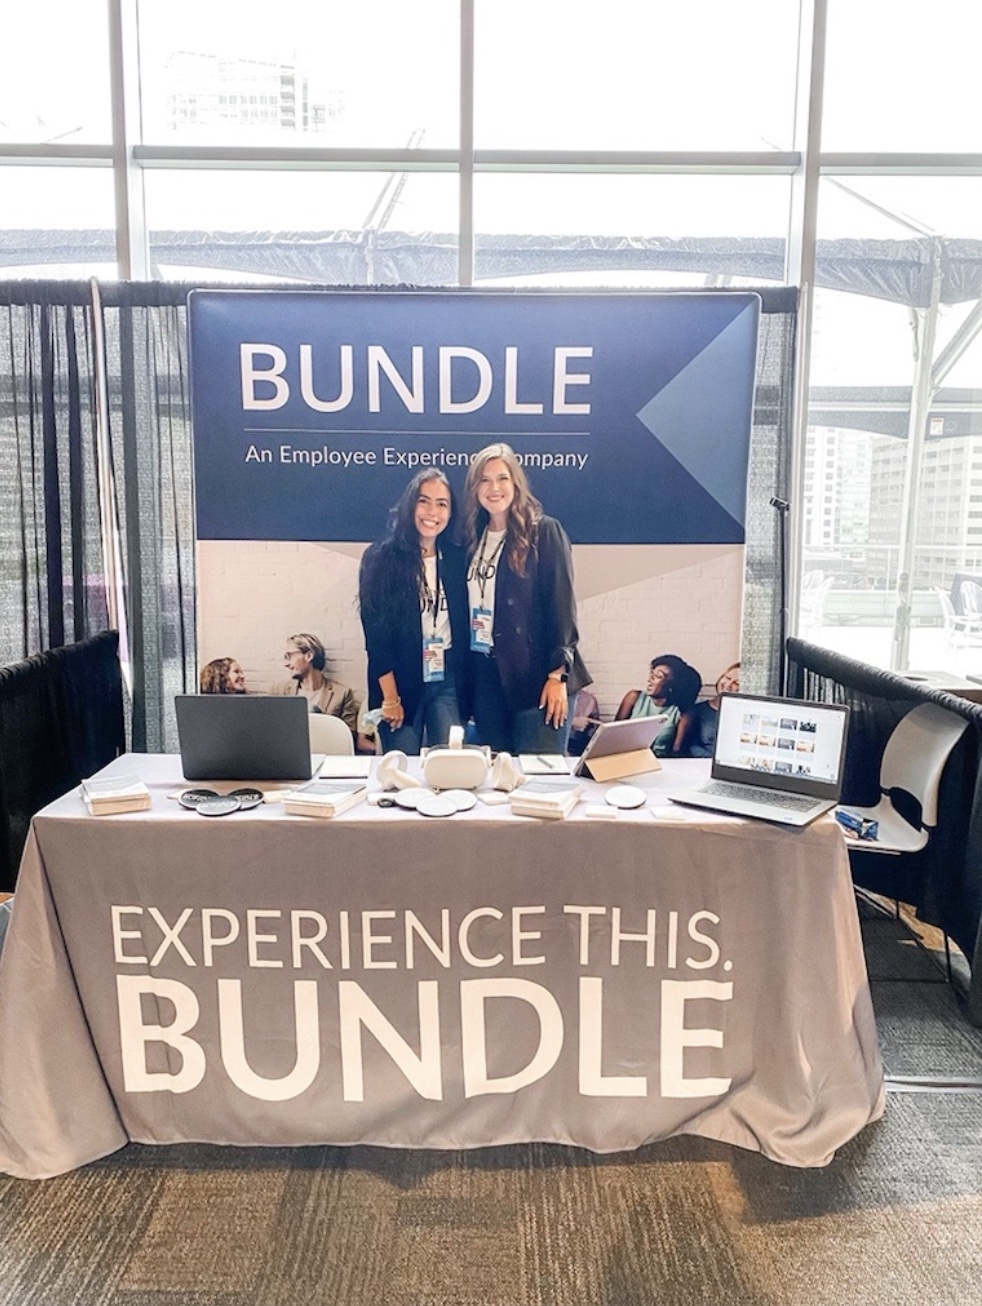 Bundle at a HR conference in San Fransisco, California. 